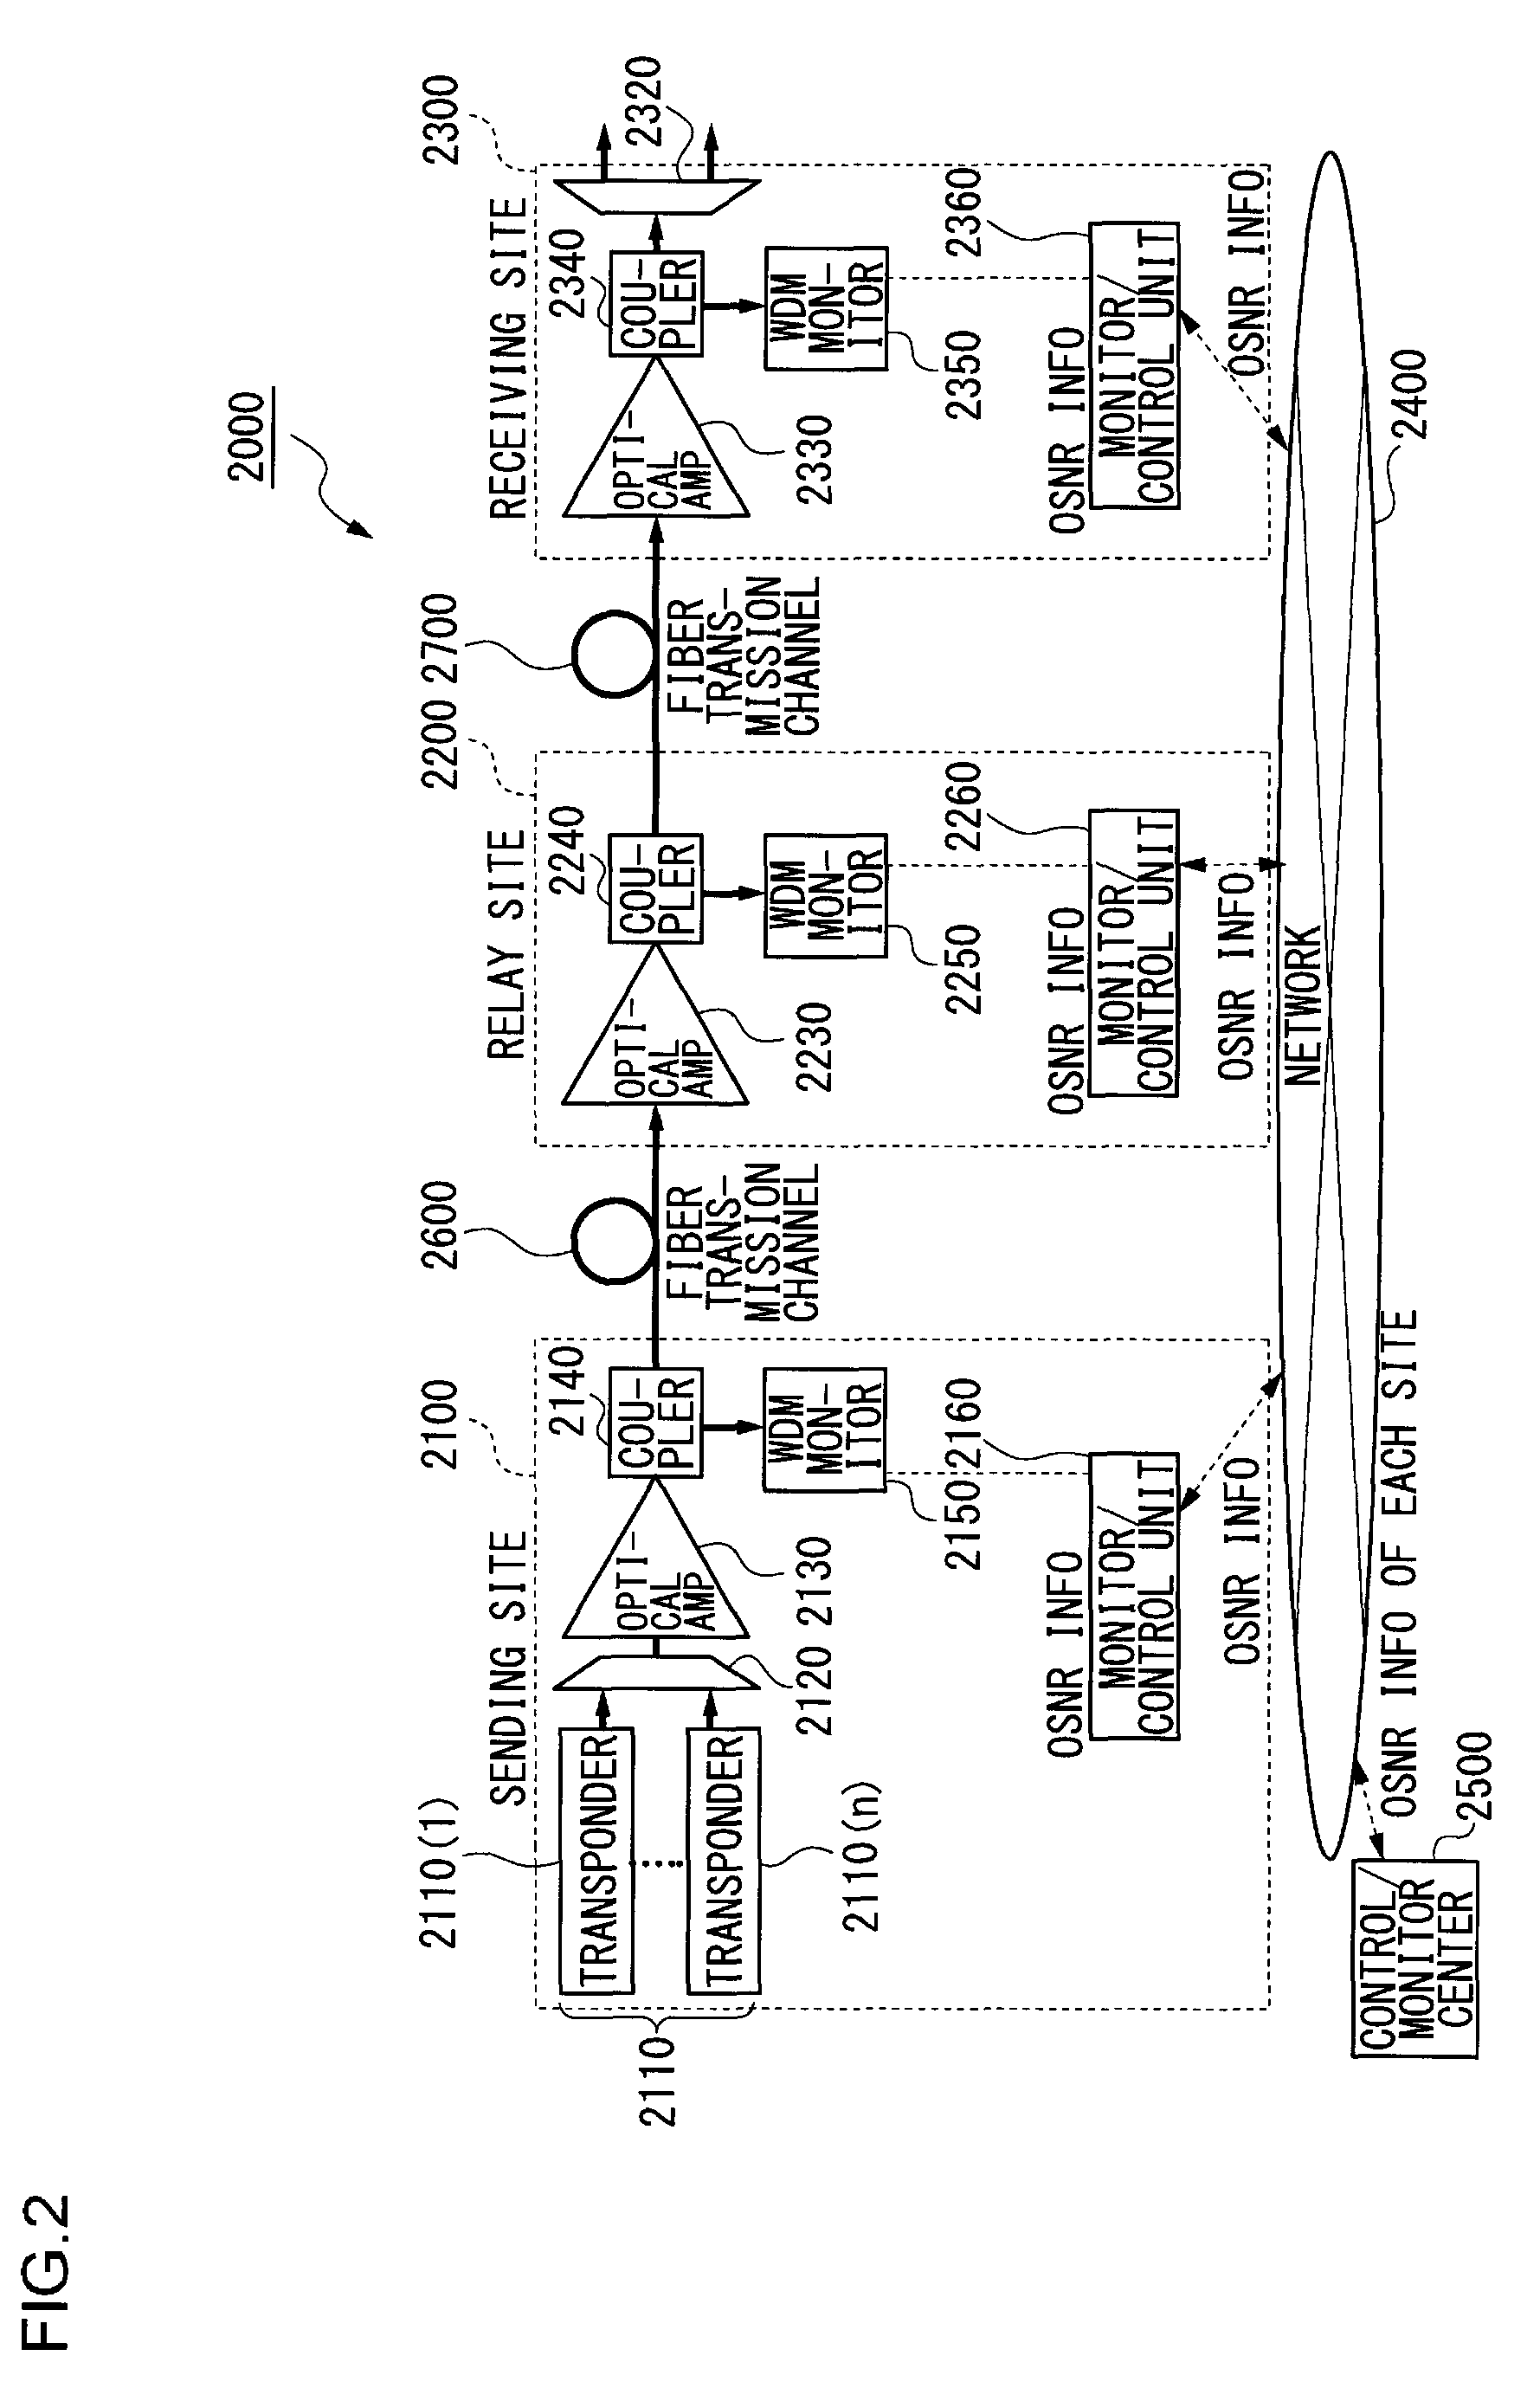 Wavelength division multiplexing transmission system and apparatus and optical signal noise ratio calculation method